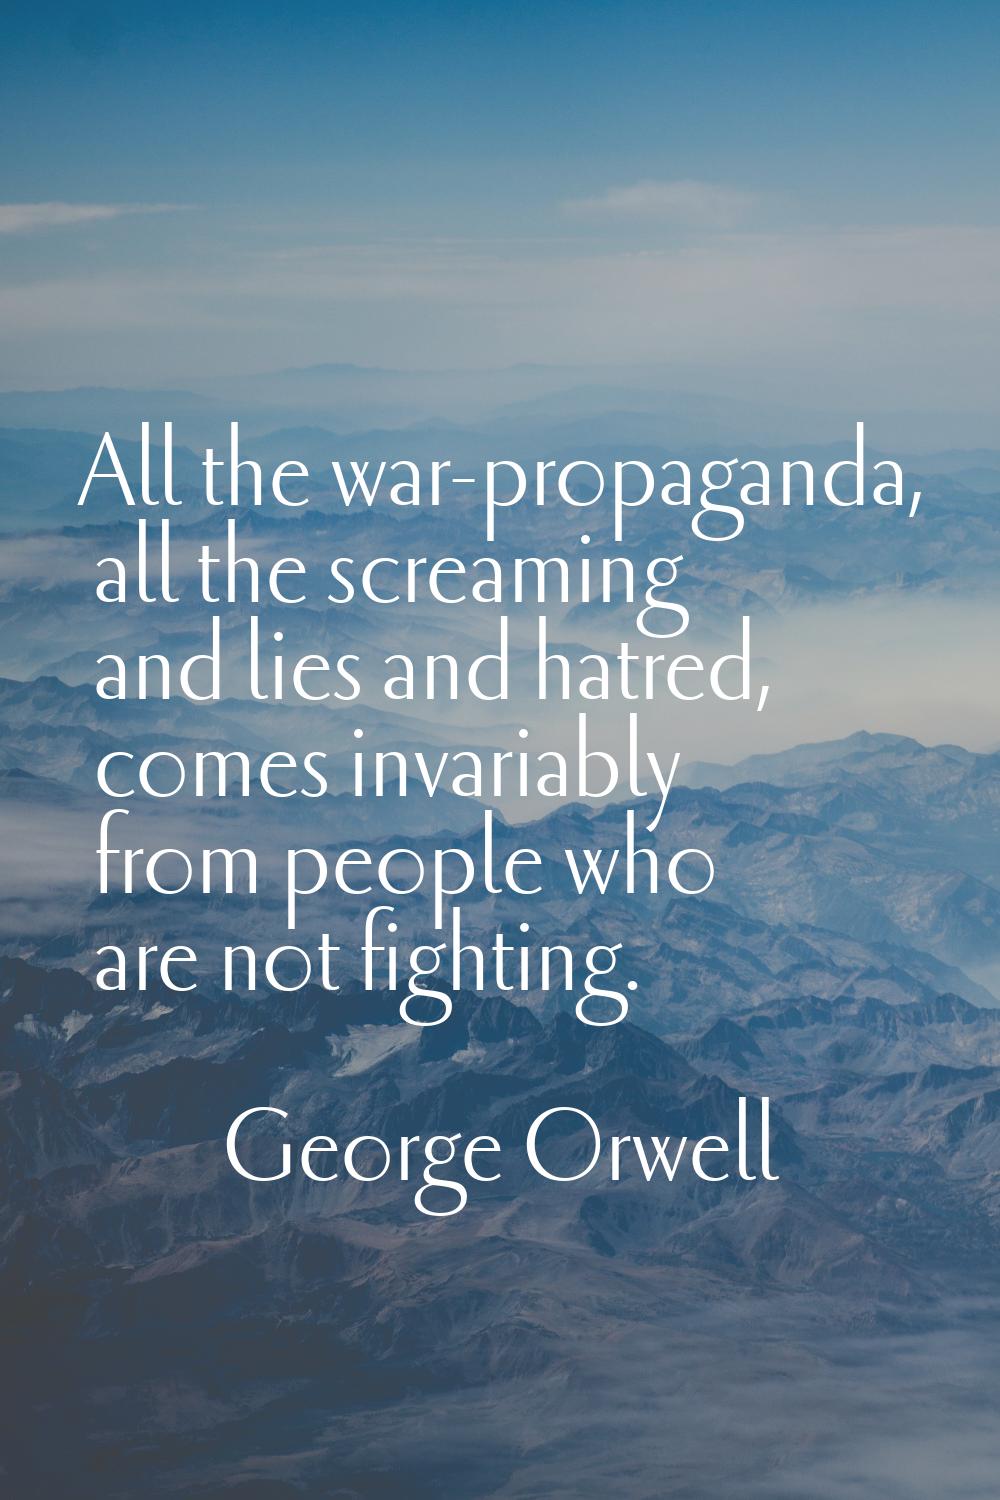 All the war-propaganda, all the screaming and lies and hatred, comes invariably from people who are